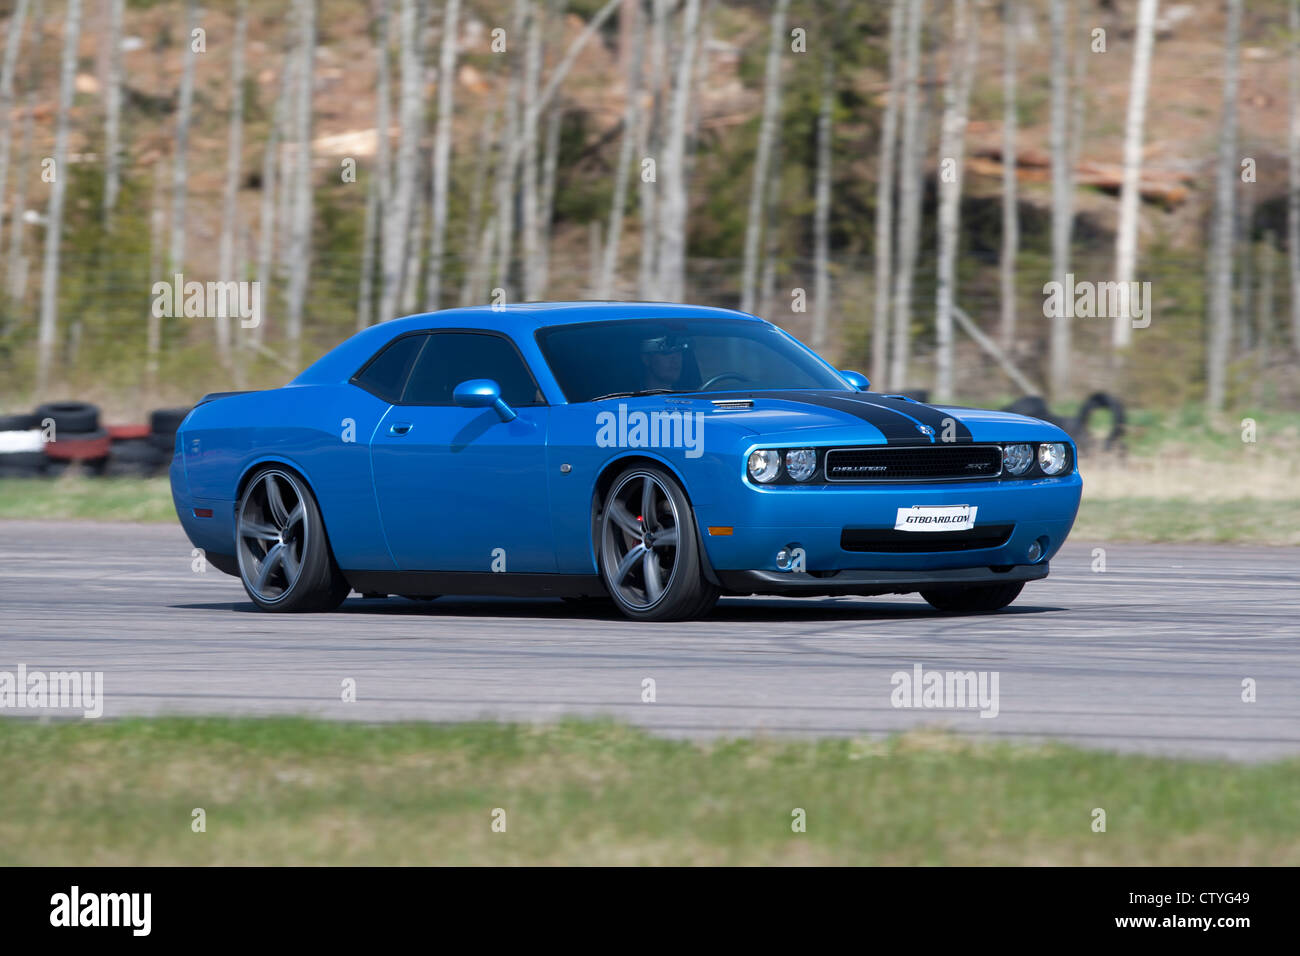 Blue Dodge Challenger on the race track Stock Photo